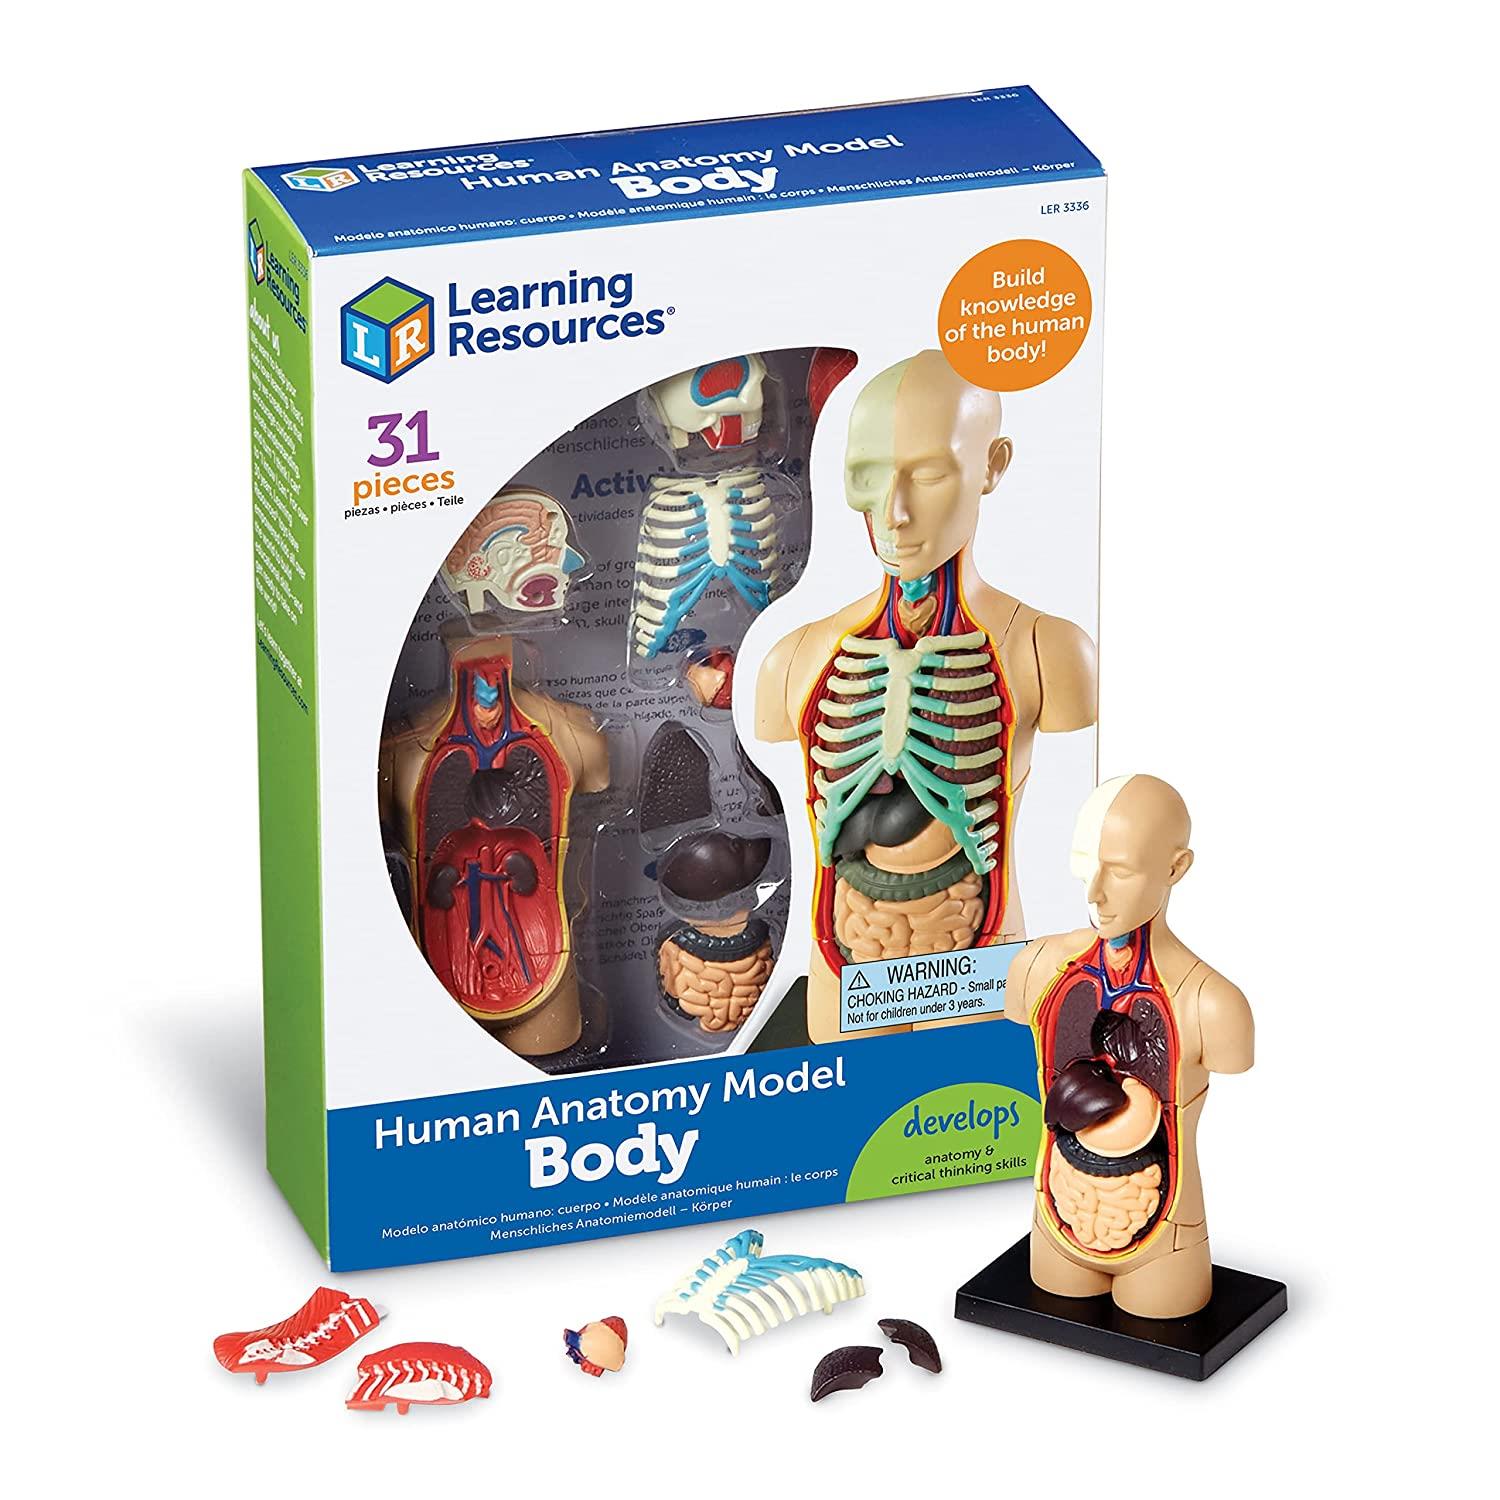 Learning Resources Anatomy Model - Human Body